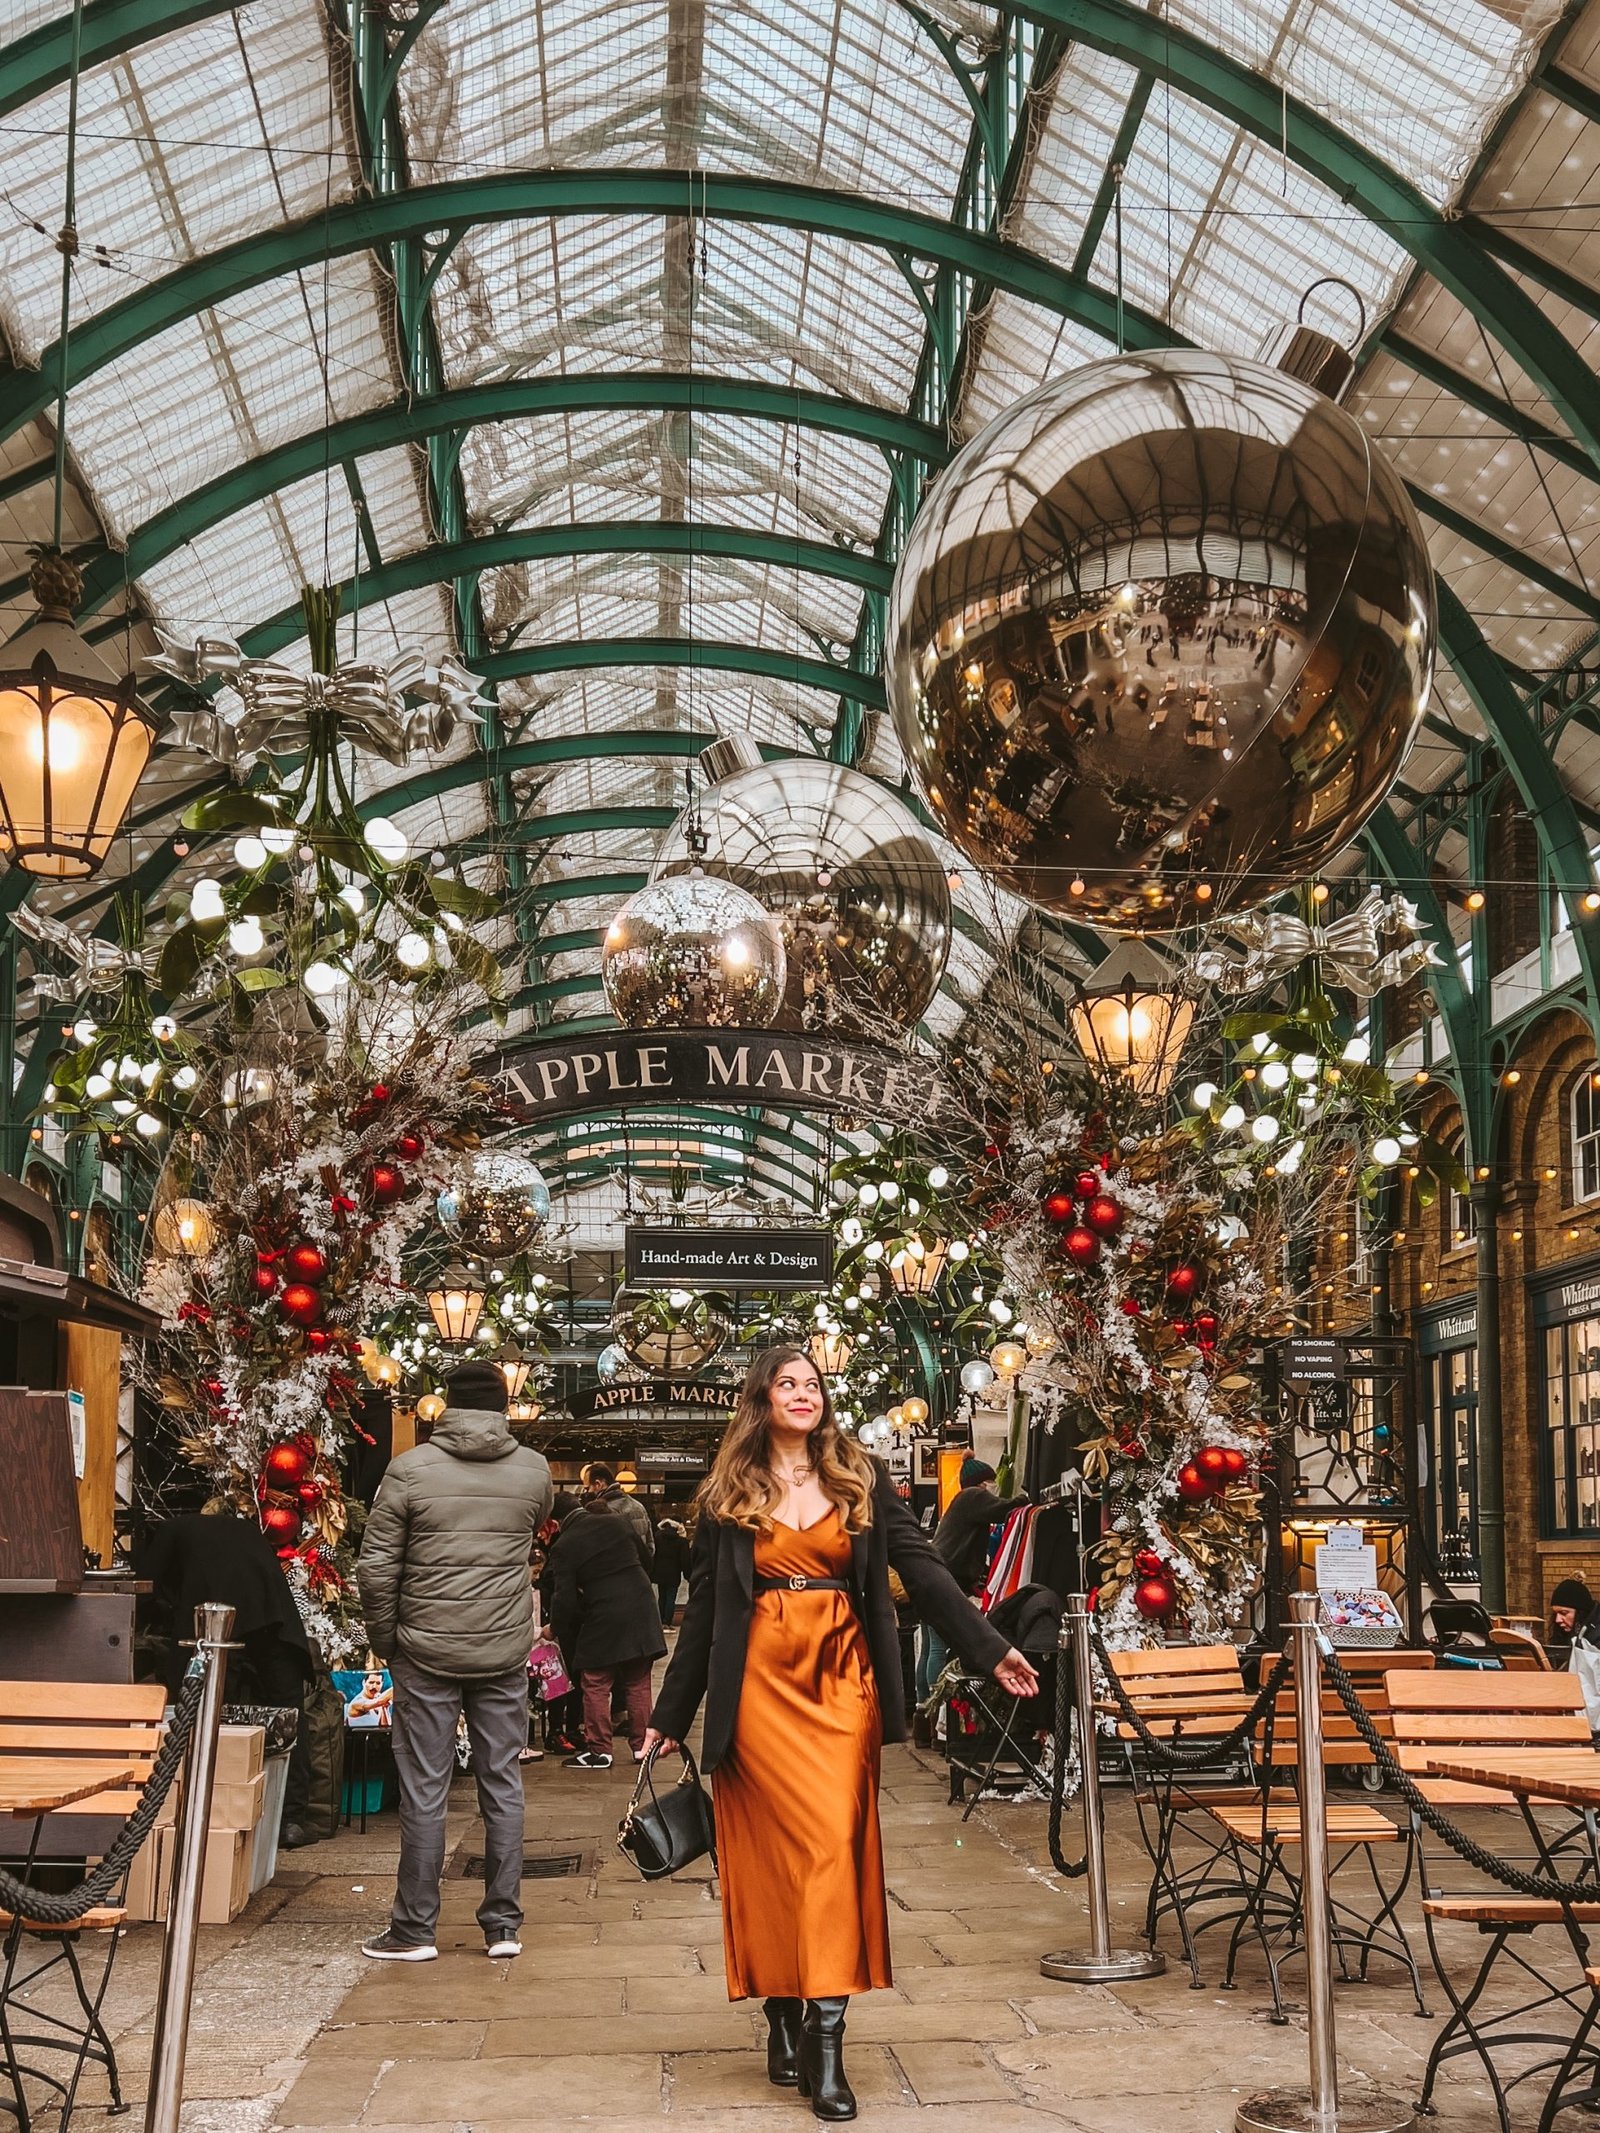 Covent garden most instagrammable places in london - Apple Market 